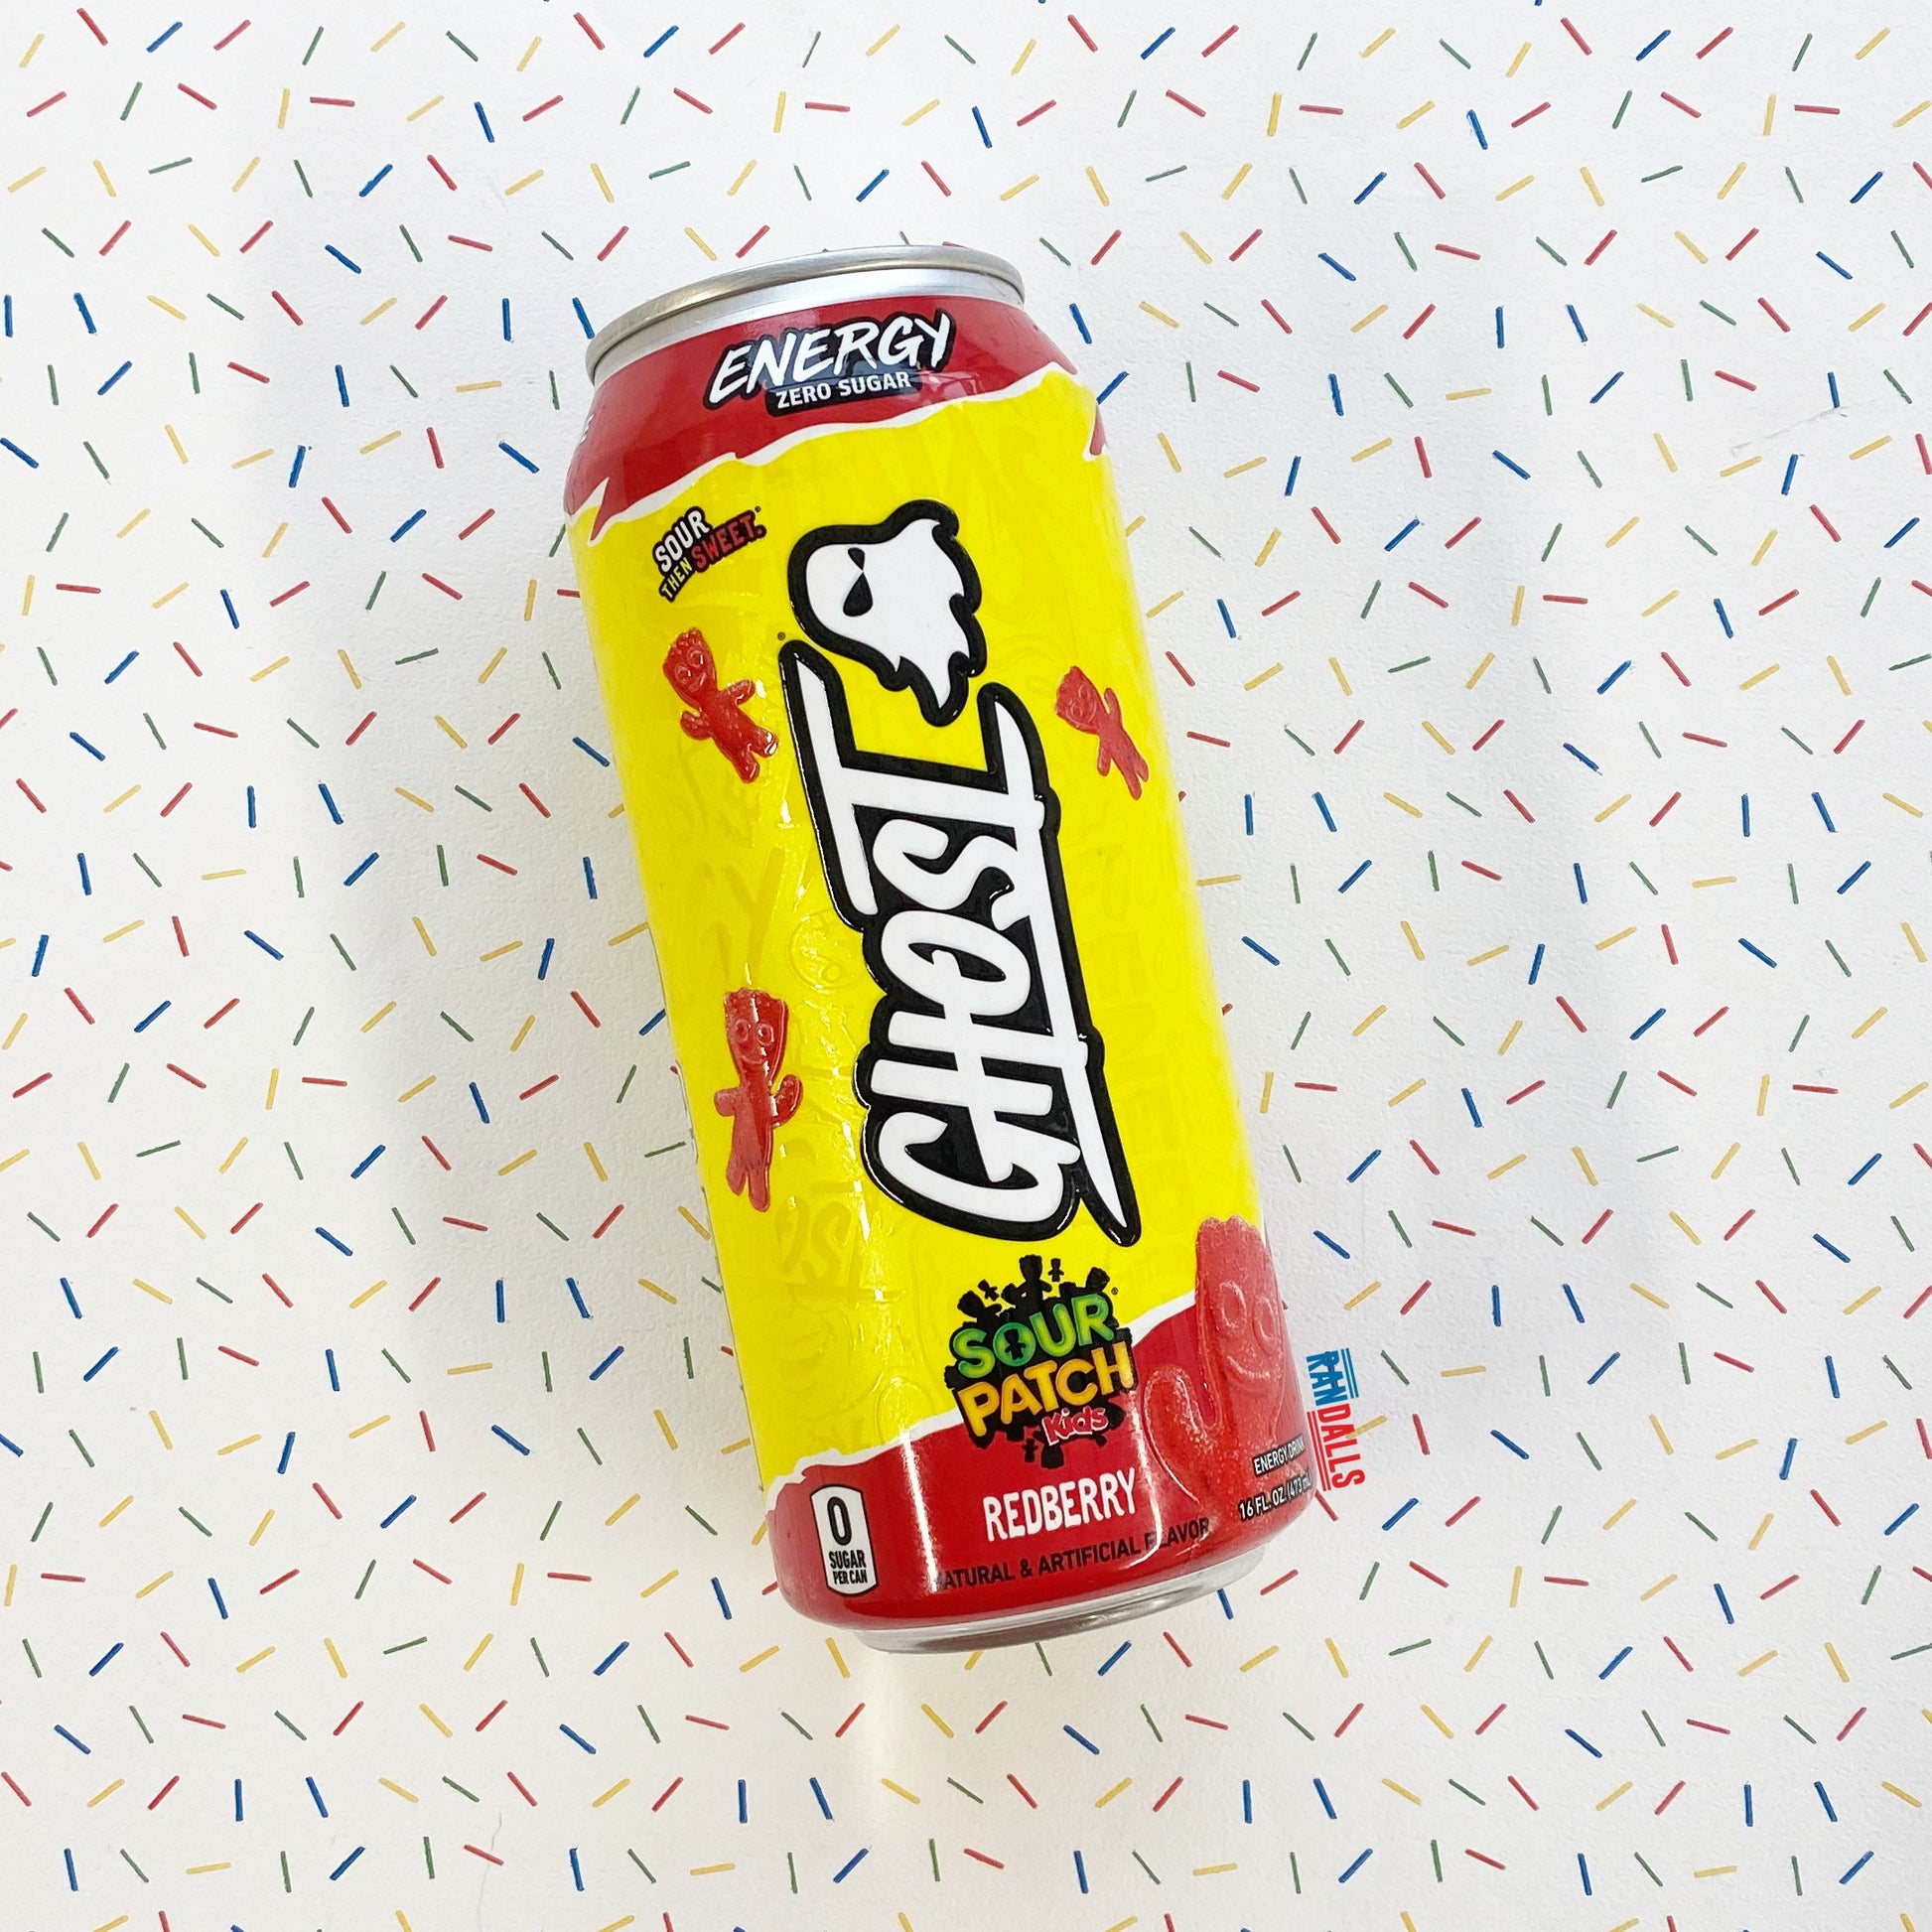 ghost energy sour patch kids redberry, energy drink, zero sugar, sugar free, candy, sweet, sour, caffeine, randalls